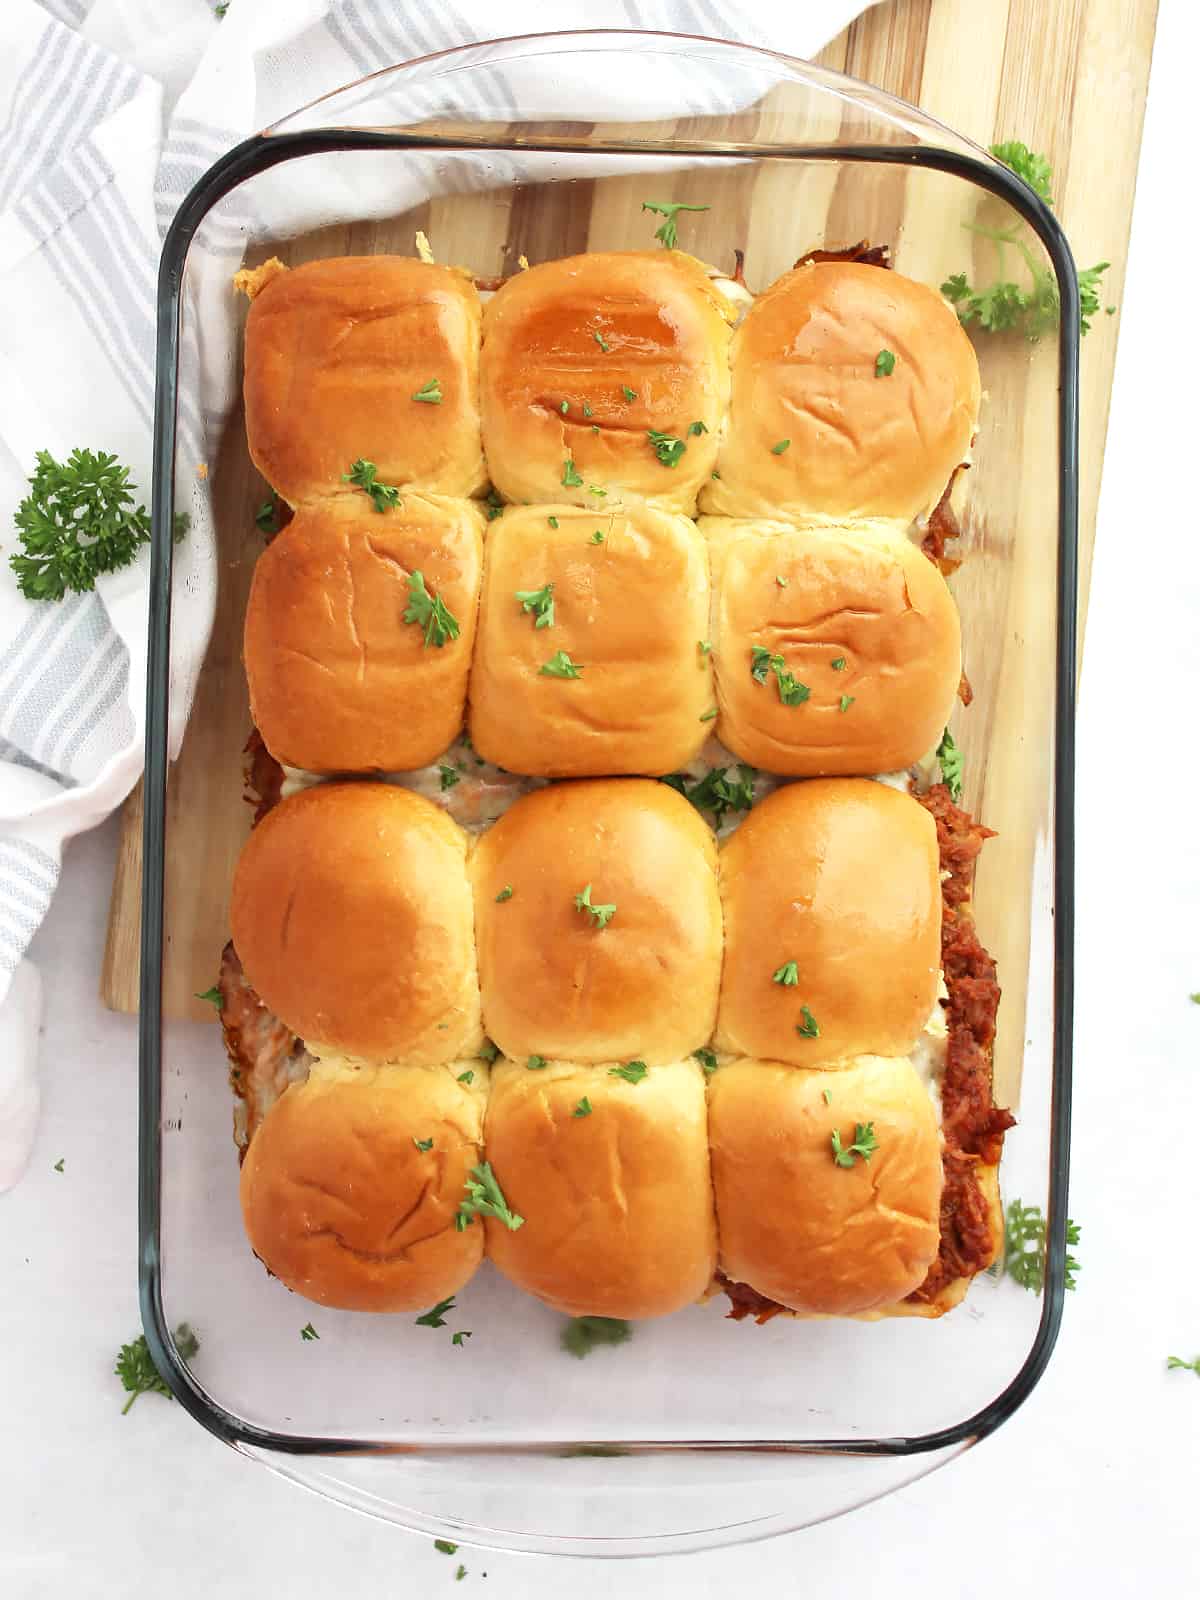 Overhead shot of twelve pulled pork sliders in a glass casserole dish garnished with fresh parsley.